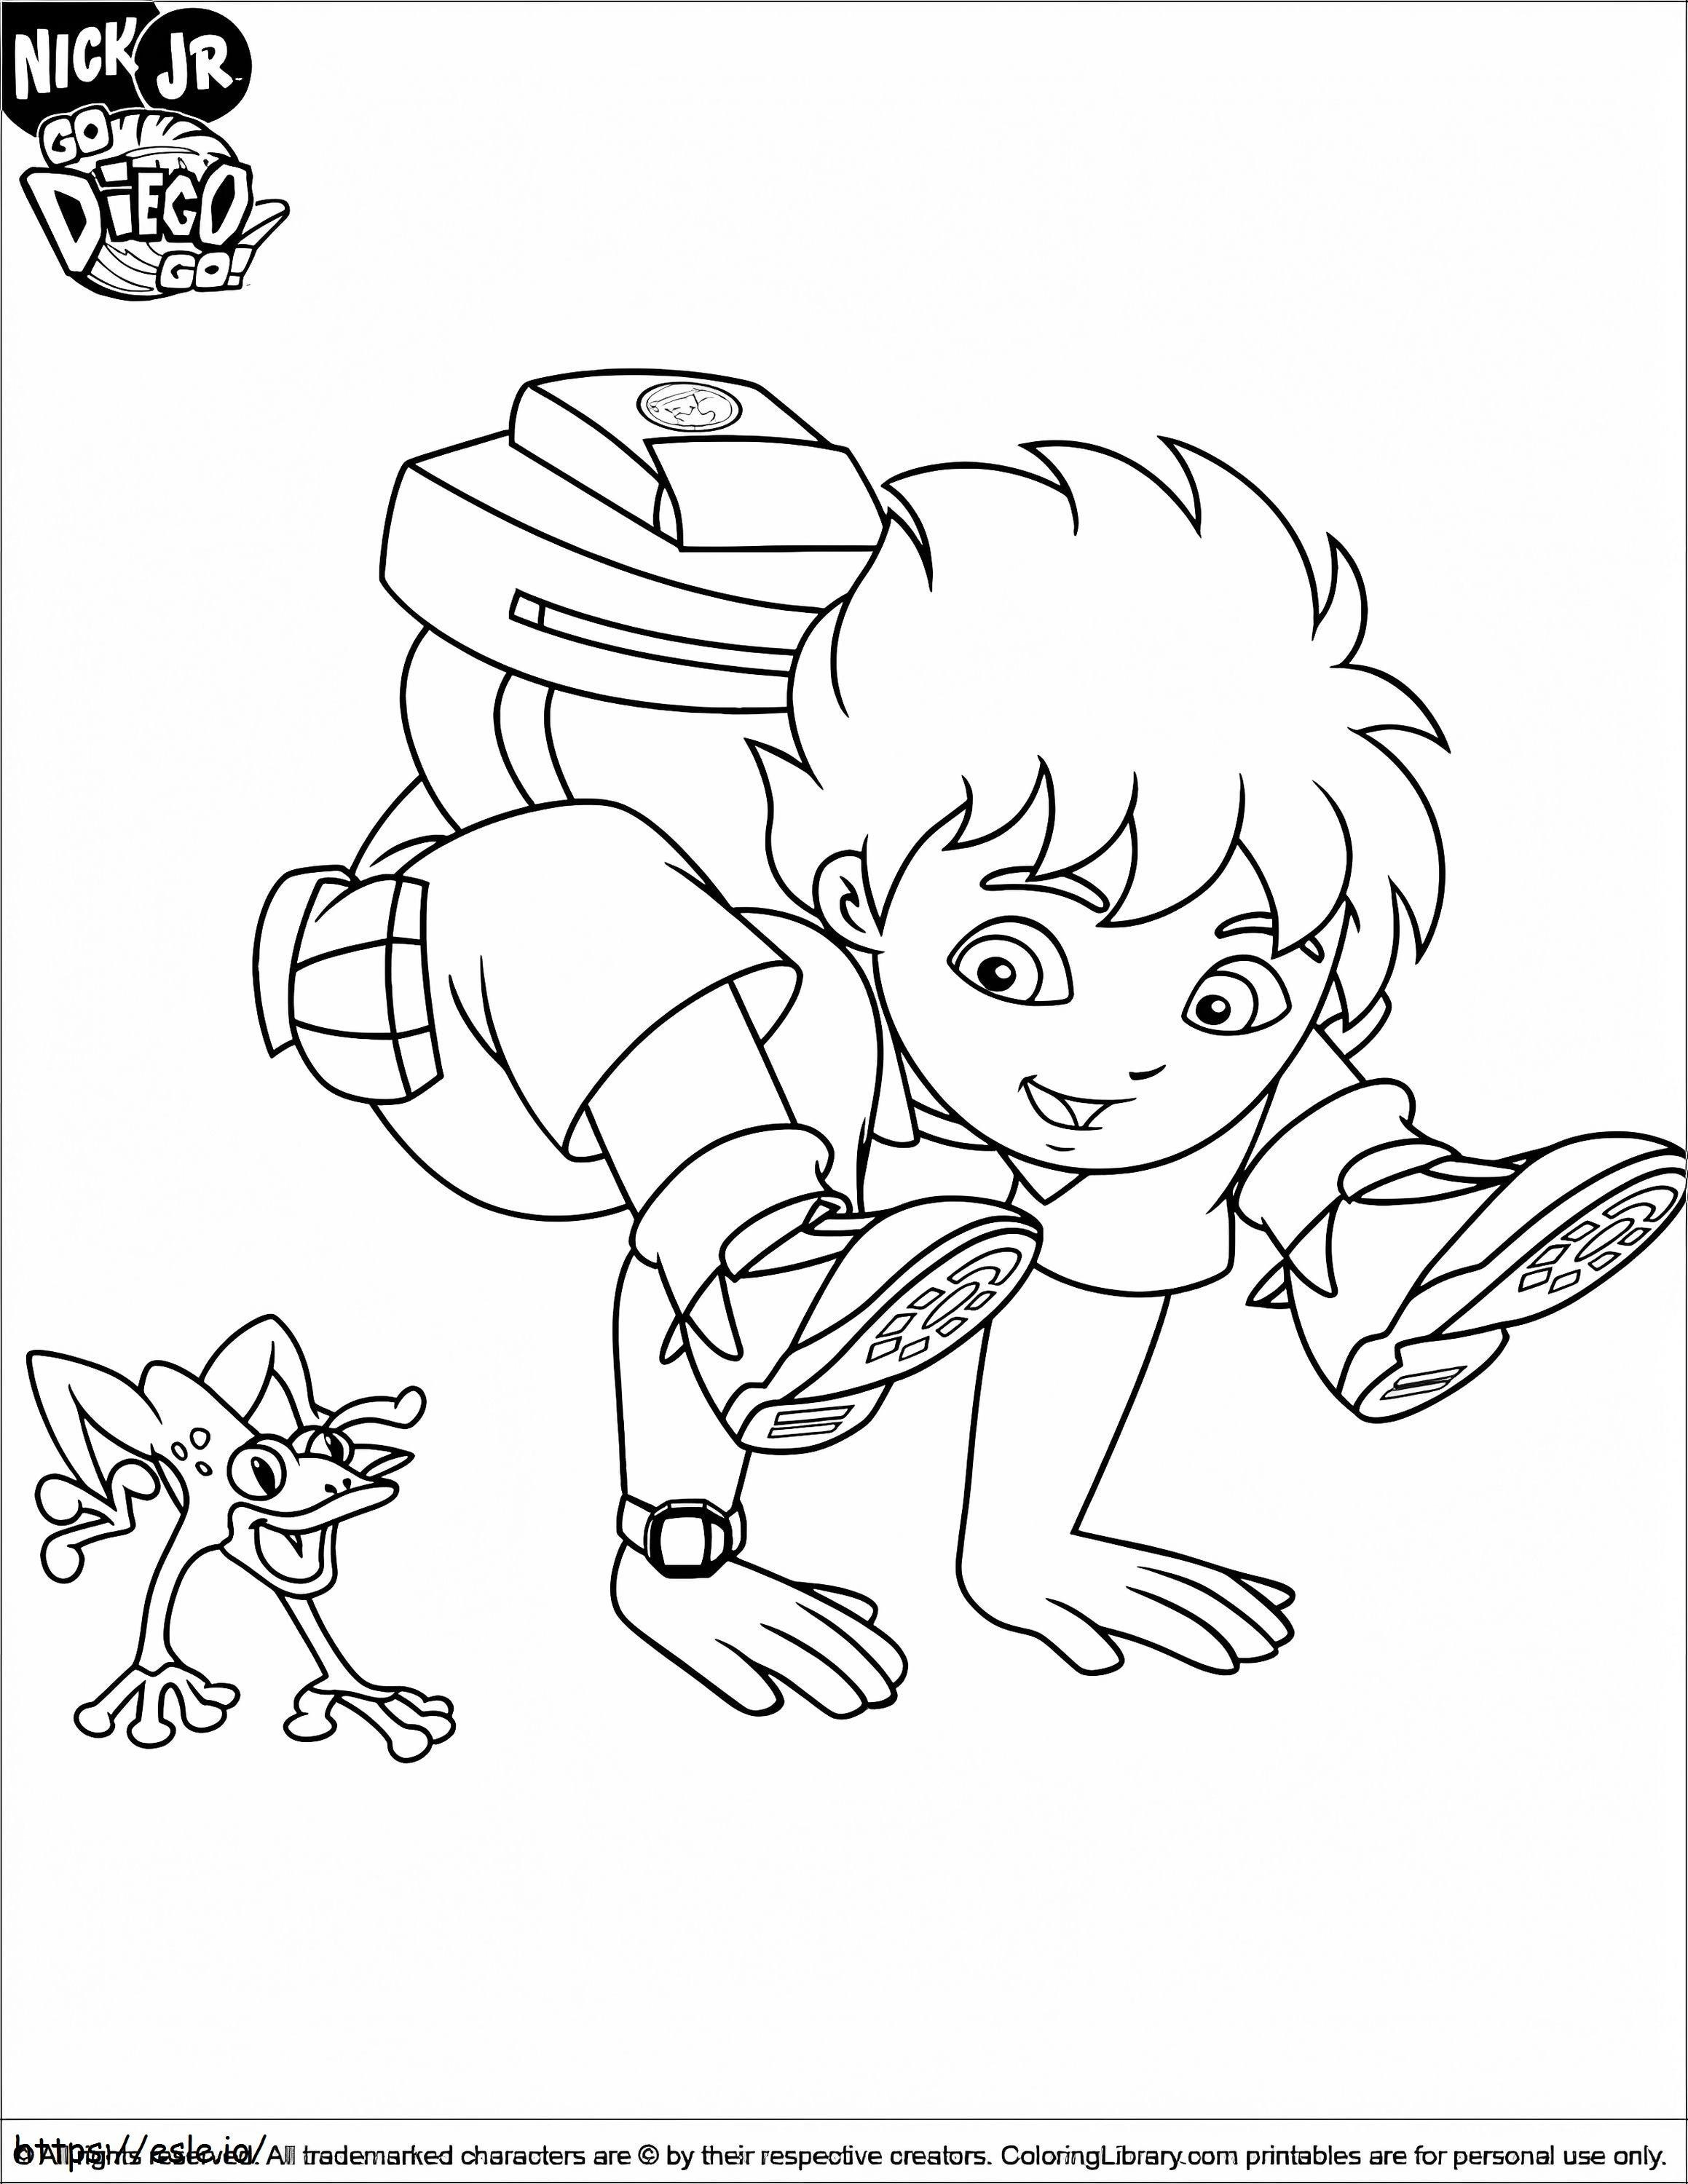 Diego And Frog coloring page